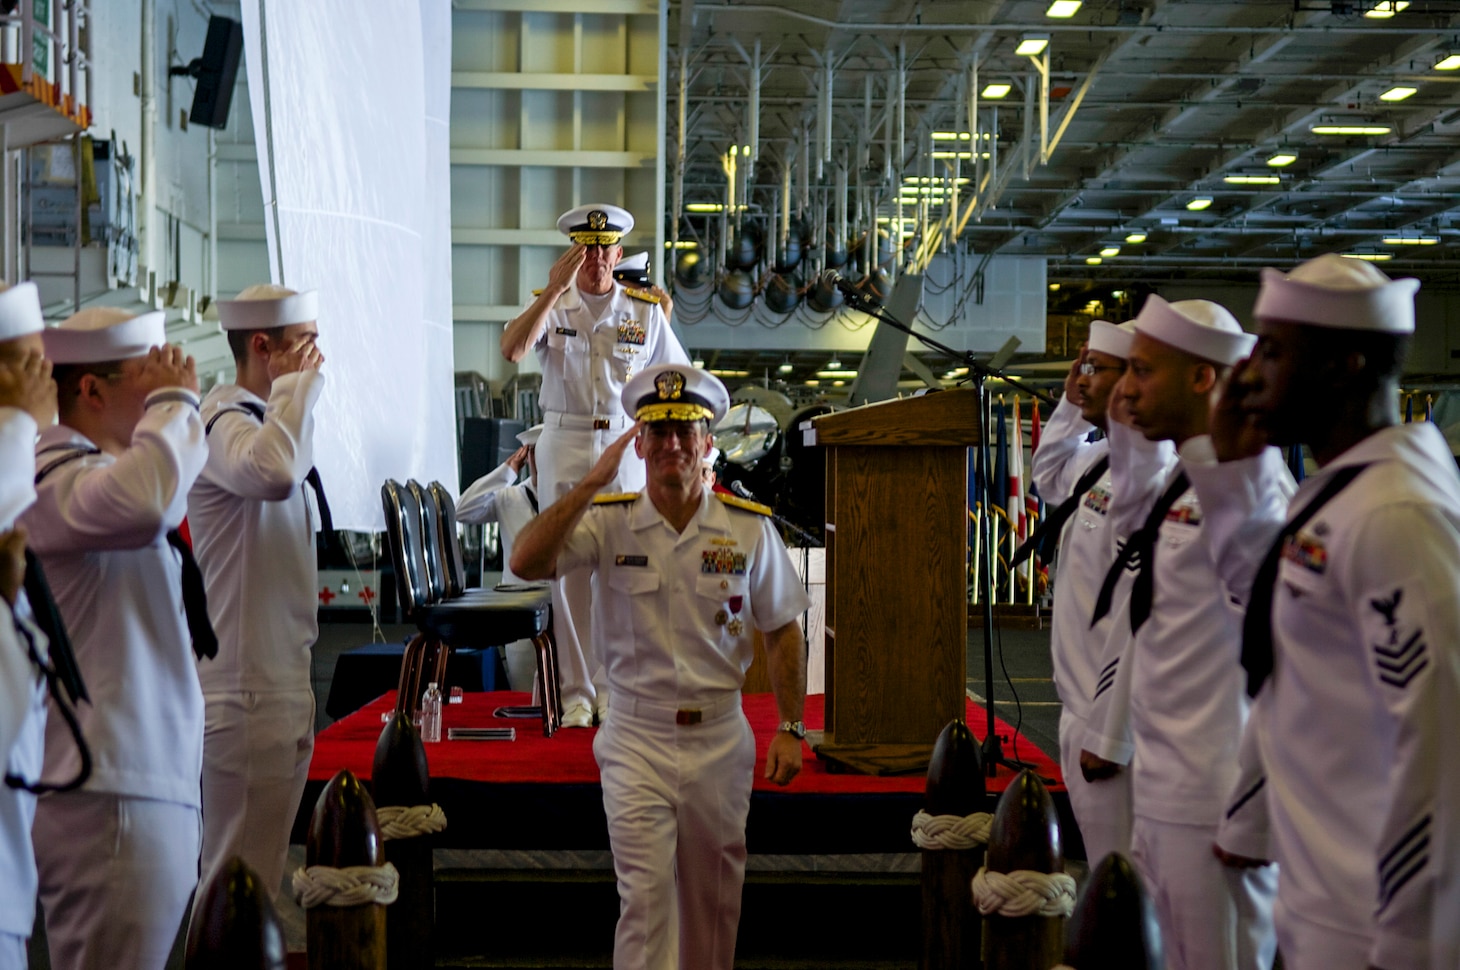 PHILIPPINE SEA (July 18, 2018) Rear Adm. Marc Dalton departs during the Commander, Task Force 70 change of command ceremony in the hangar bay aboard the aircraft carrier USS Ronald Reagan (CVN 76). Rear Adm. Karl O. Thomas relieved Dalton as commander, CTF 70. CTF 70 is forward-deployed to the U.S. 7th Fleet area of operations in support of security and stability in the Indo-Pacific region.